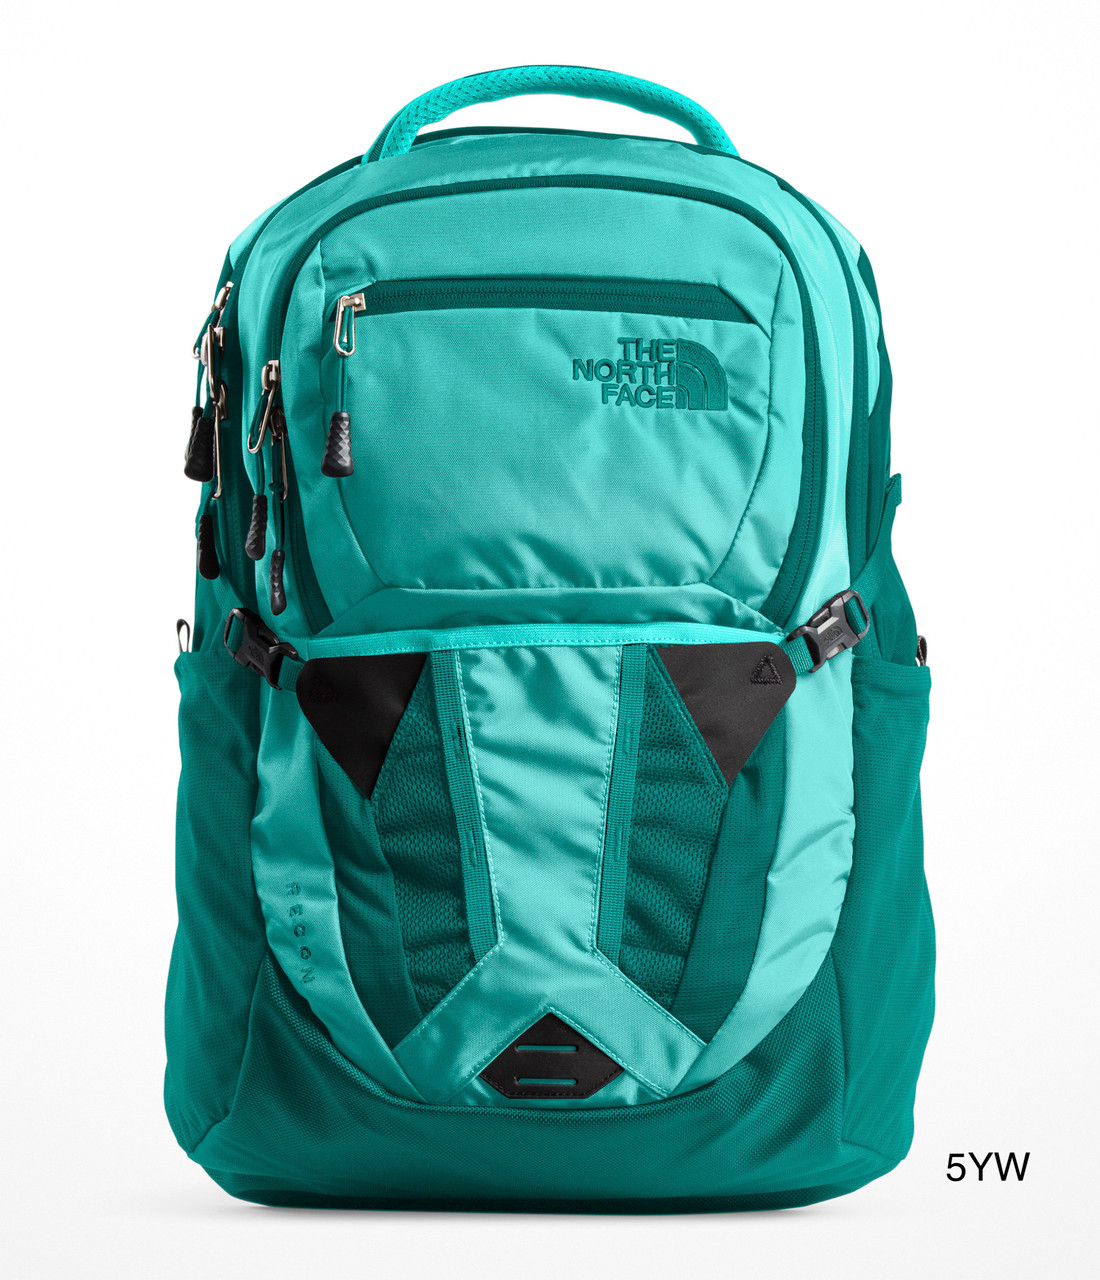 THE NORTH FACE WOMEN'S RECON BACKPACK 